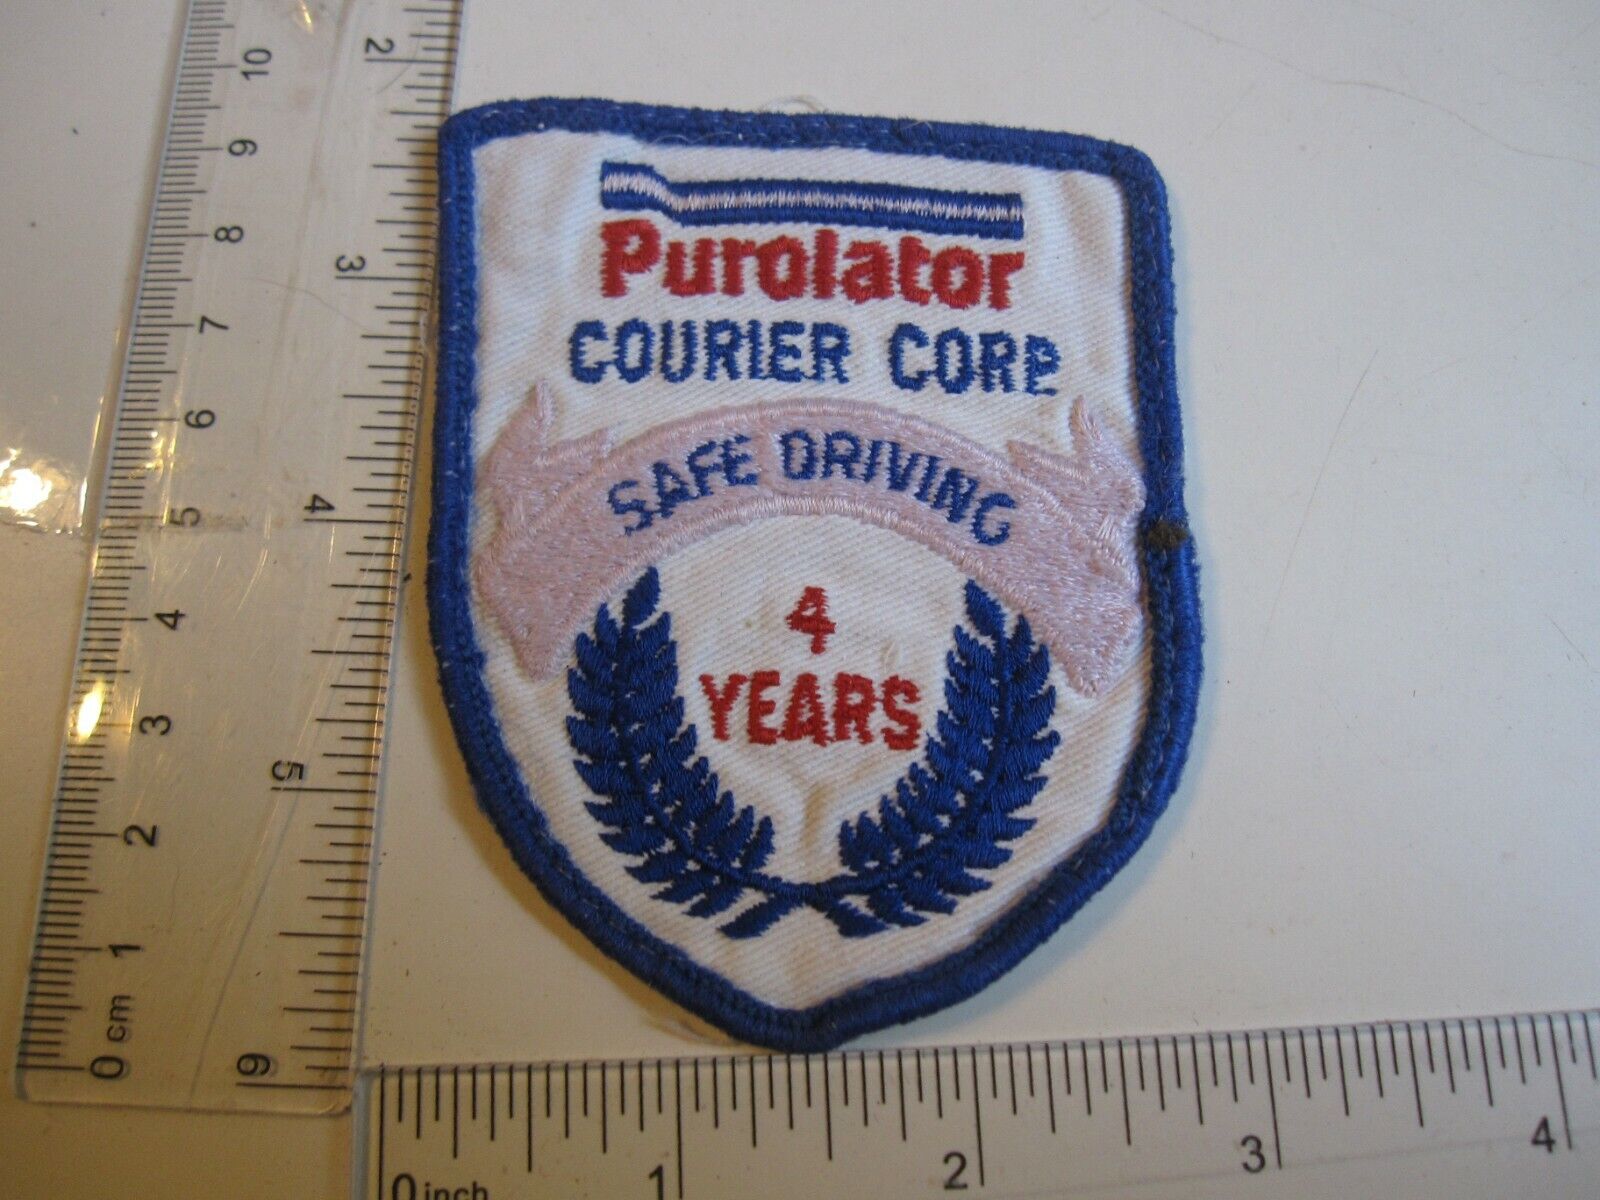 Vintage Purolator Courier Corp. 4 Years Safe Driving Patch BIS